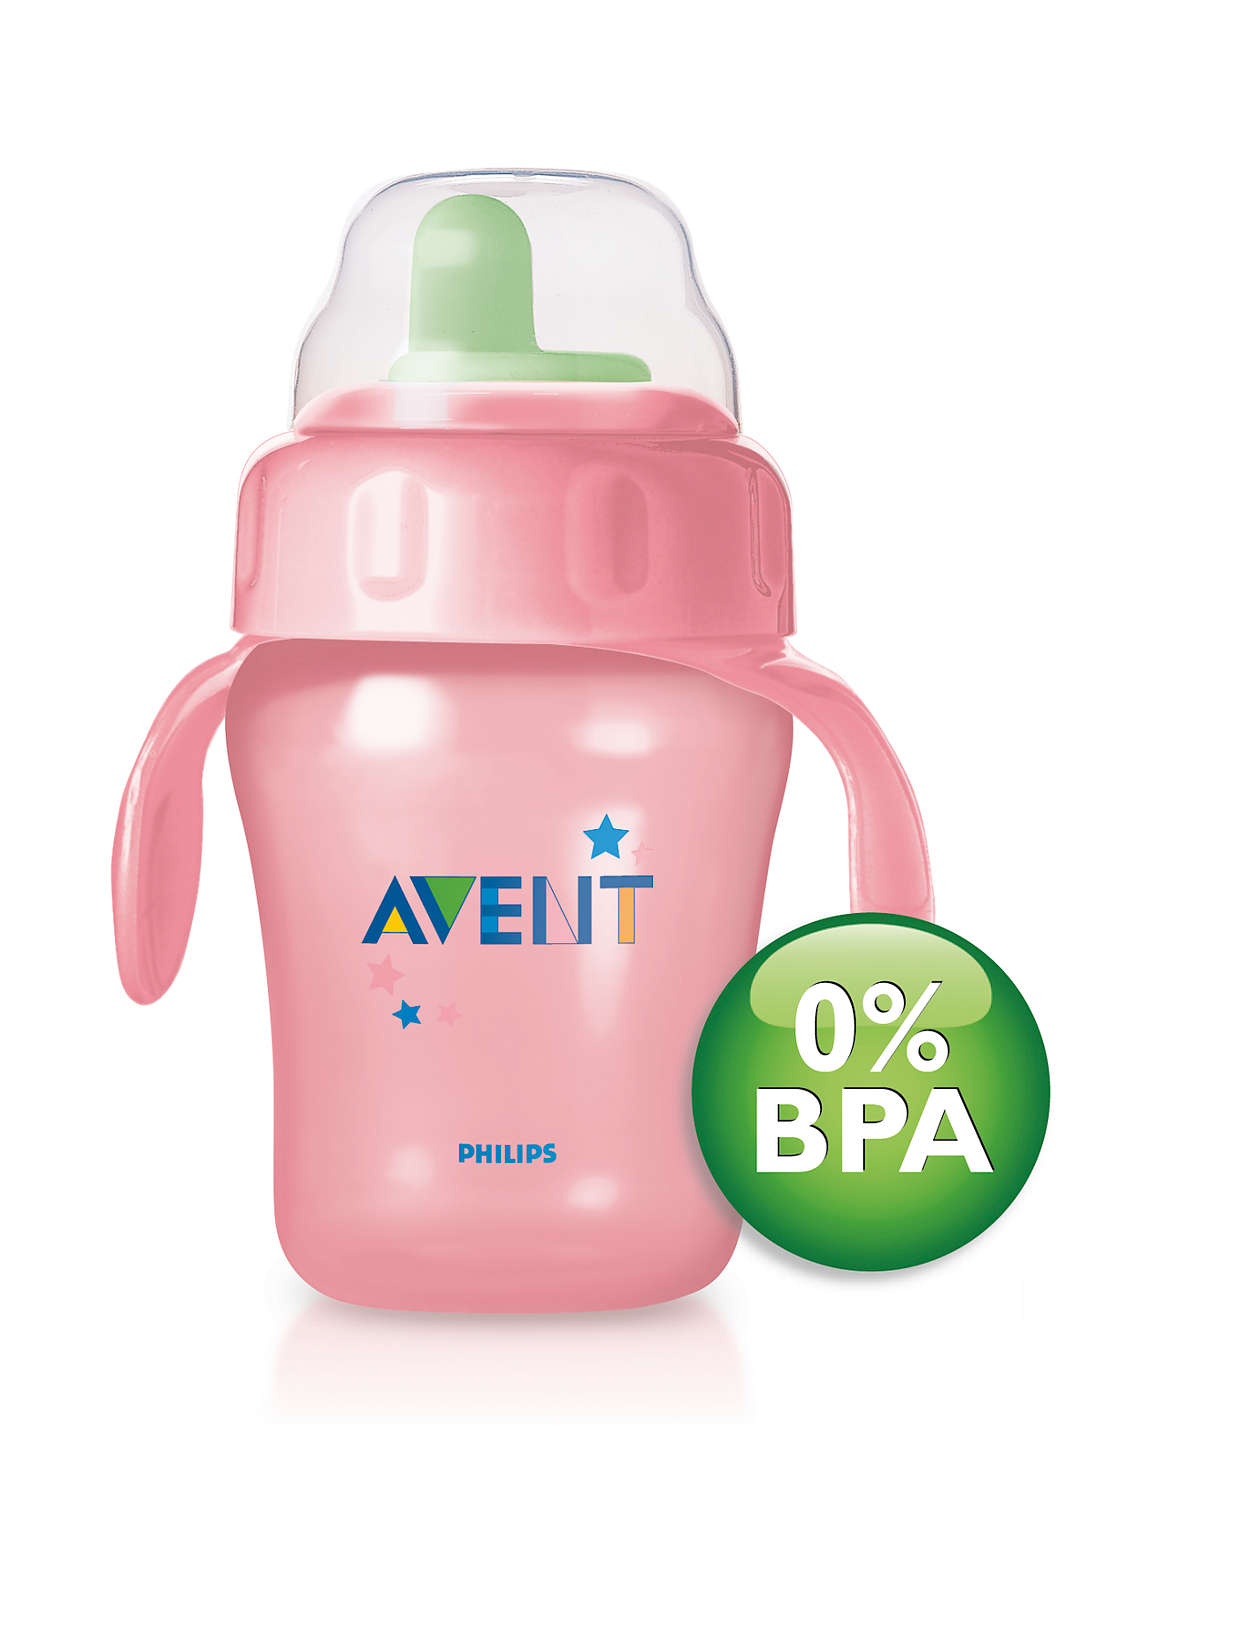 Avent Becher Mikrowelle